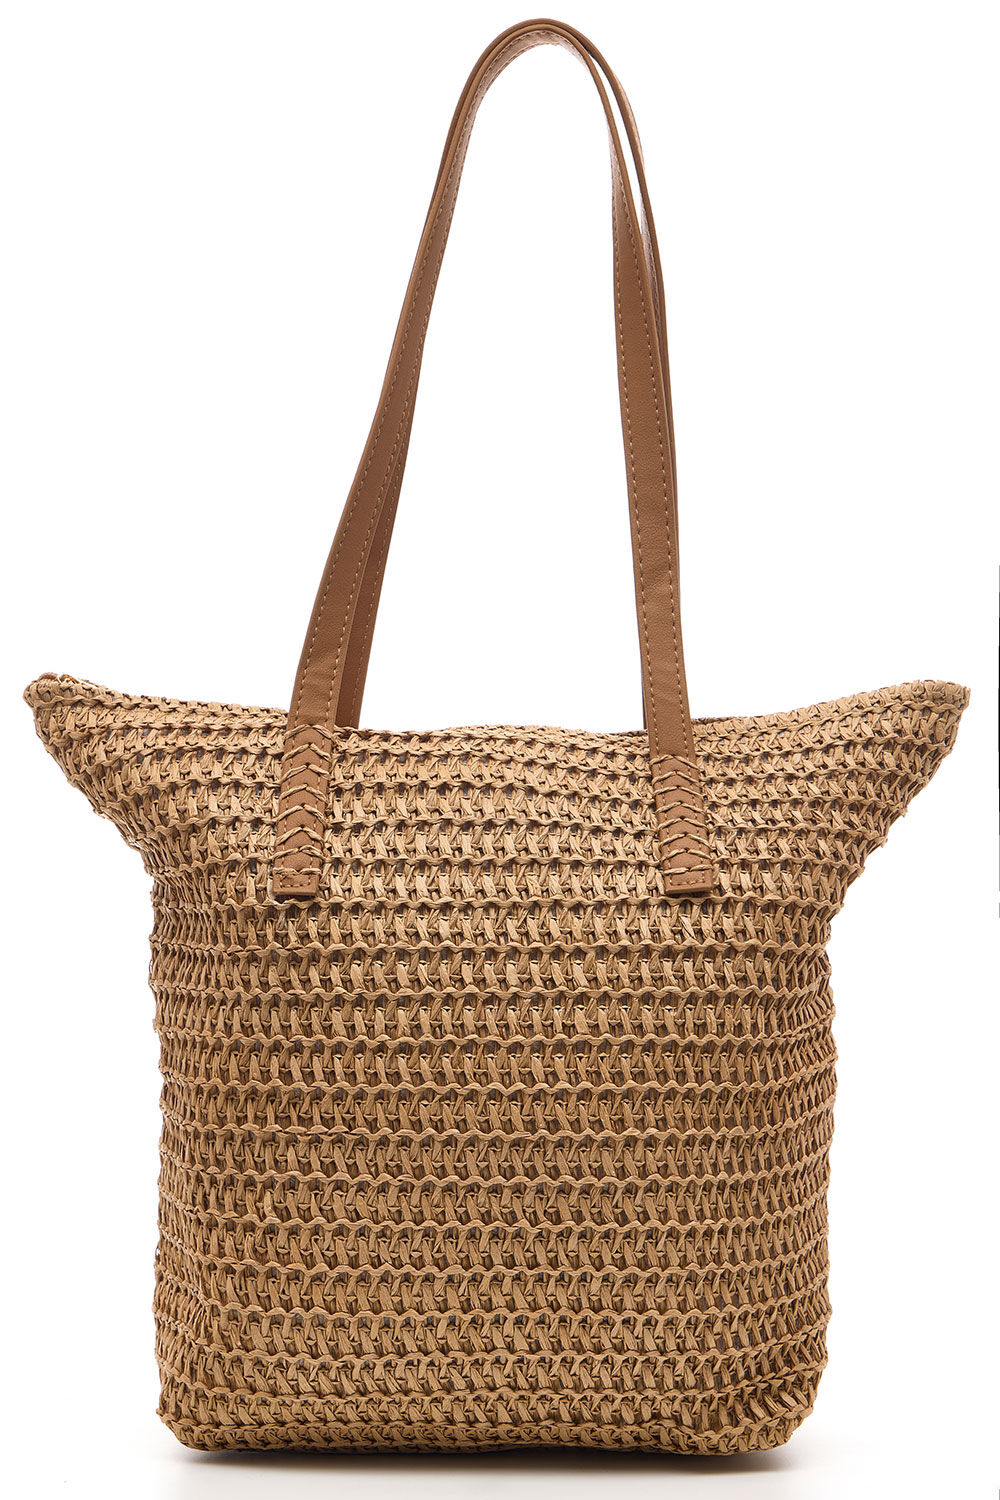 Bonmarche Stone Straw Bag With Shoulder Straps, Size: One Size - Holiday Shop